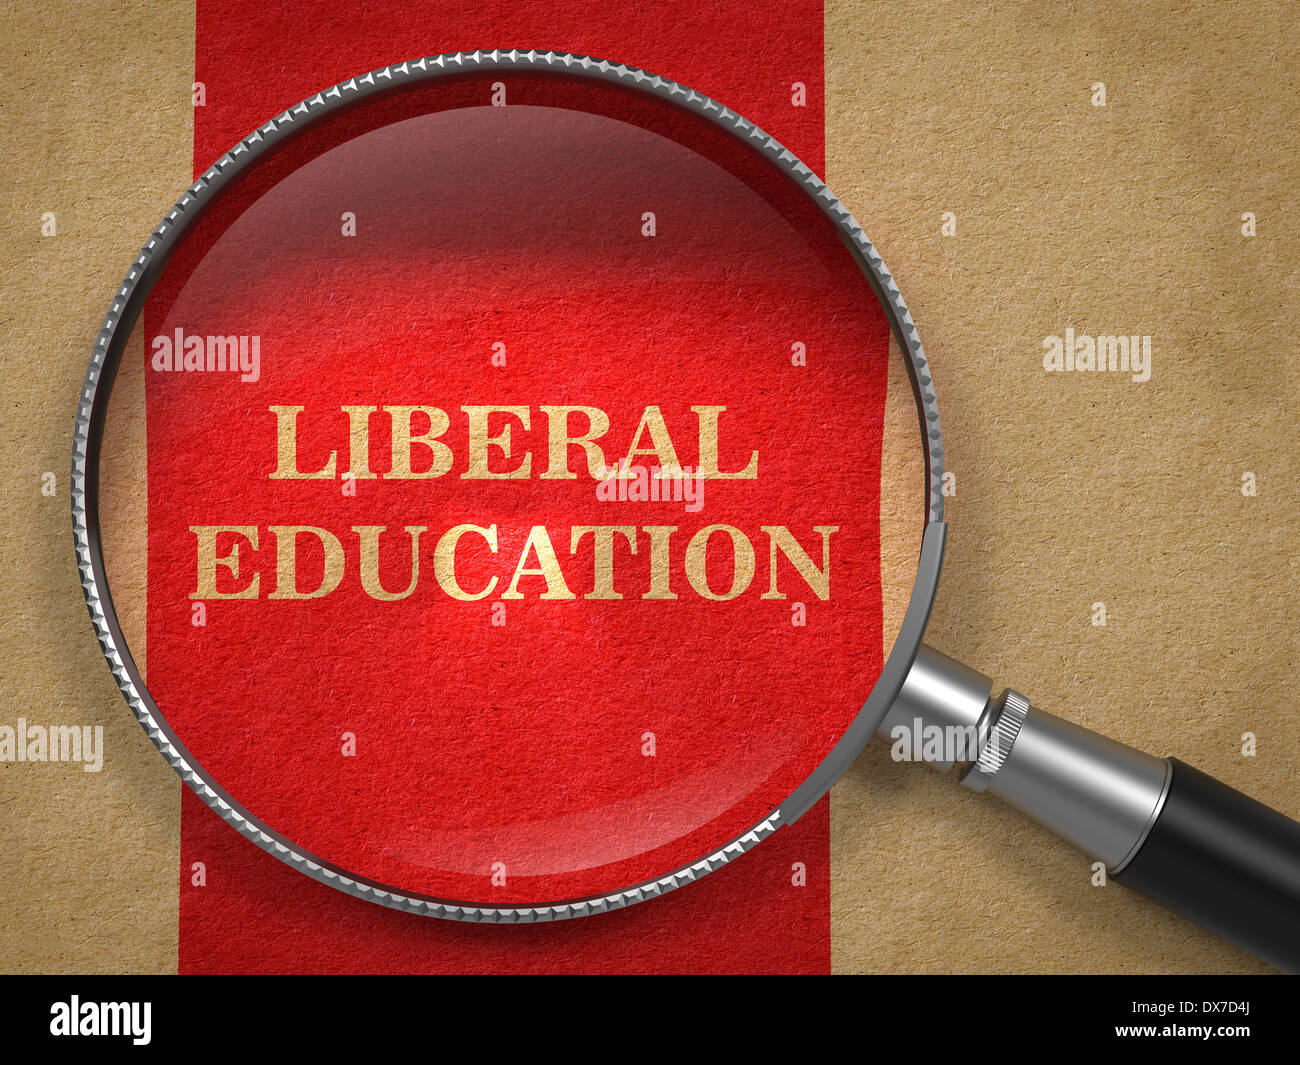 Liberal Education Concept - Magnifying Glass. Stock Photo